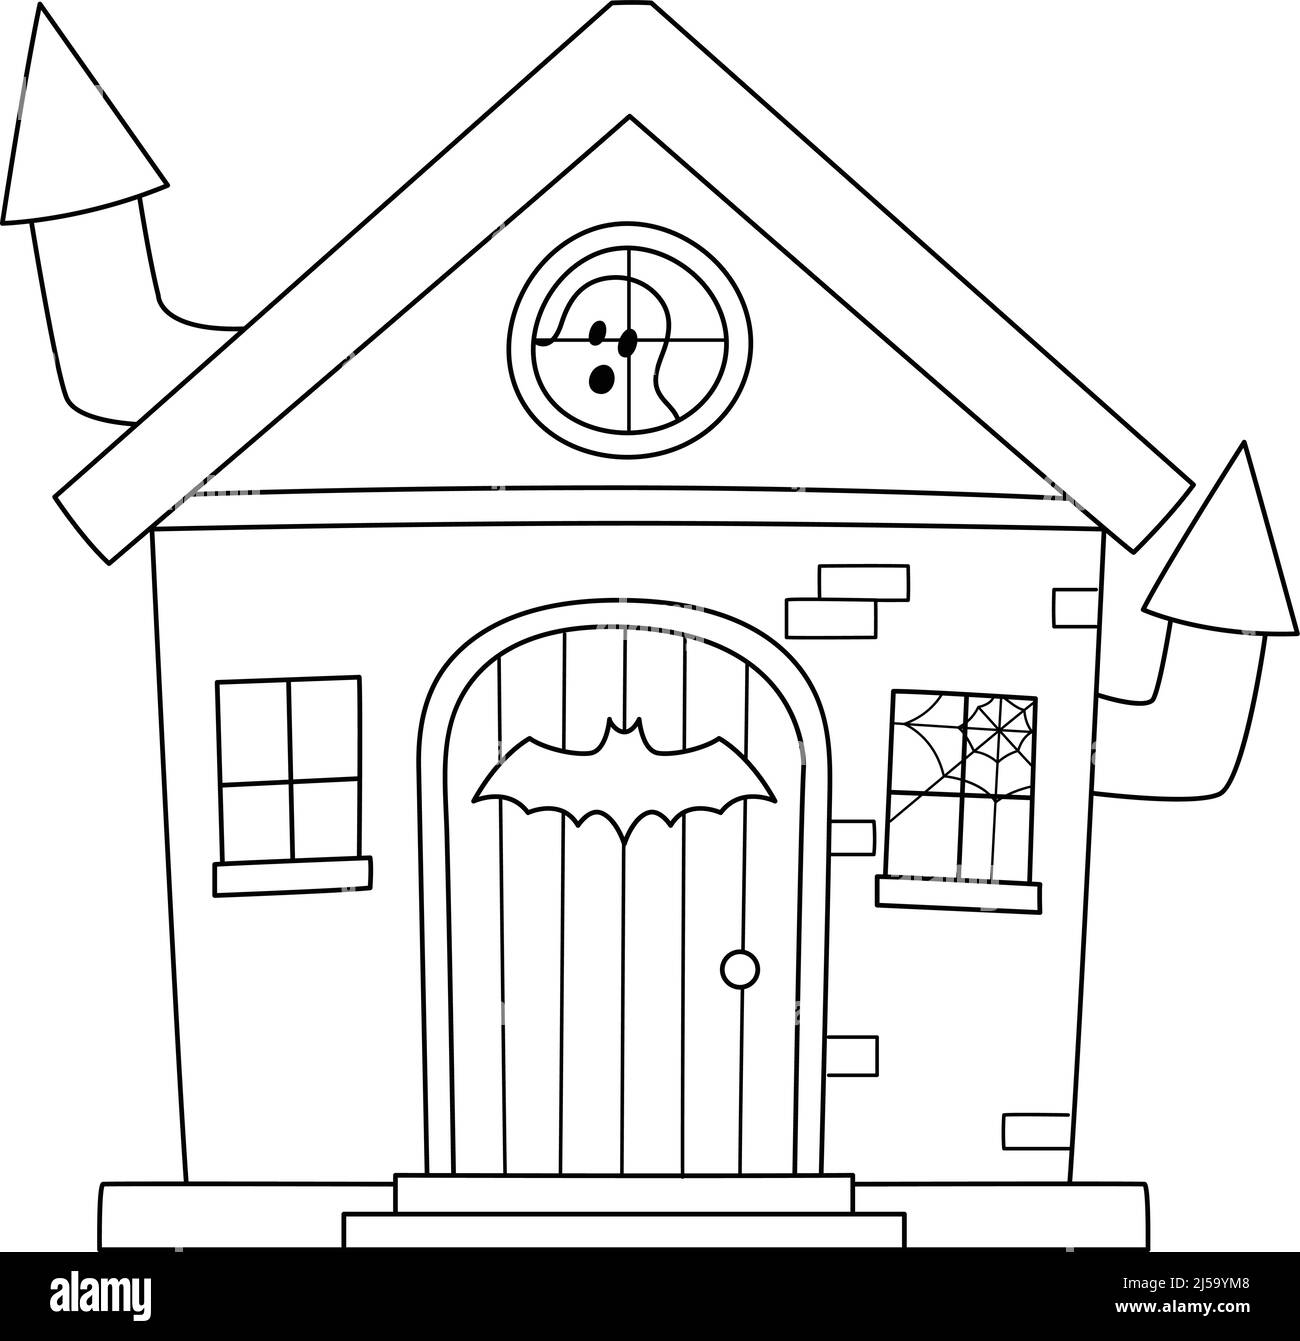 Trick or Treating Halloween Coloring Page Isolated Stock Vector Image